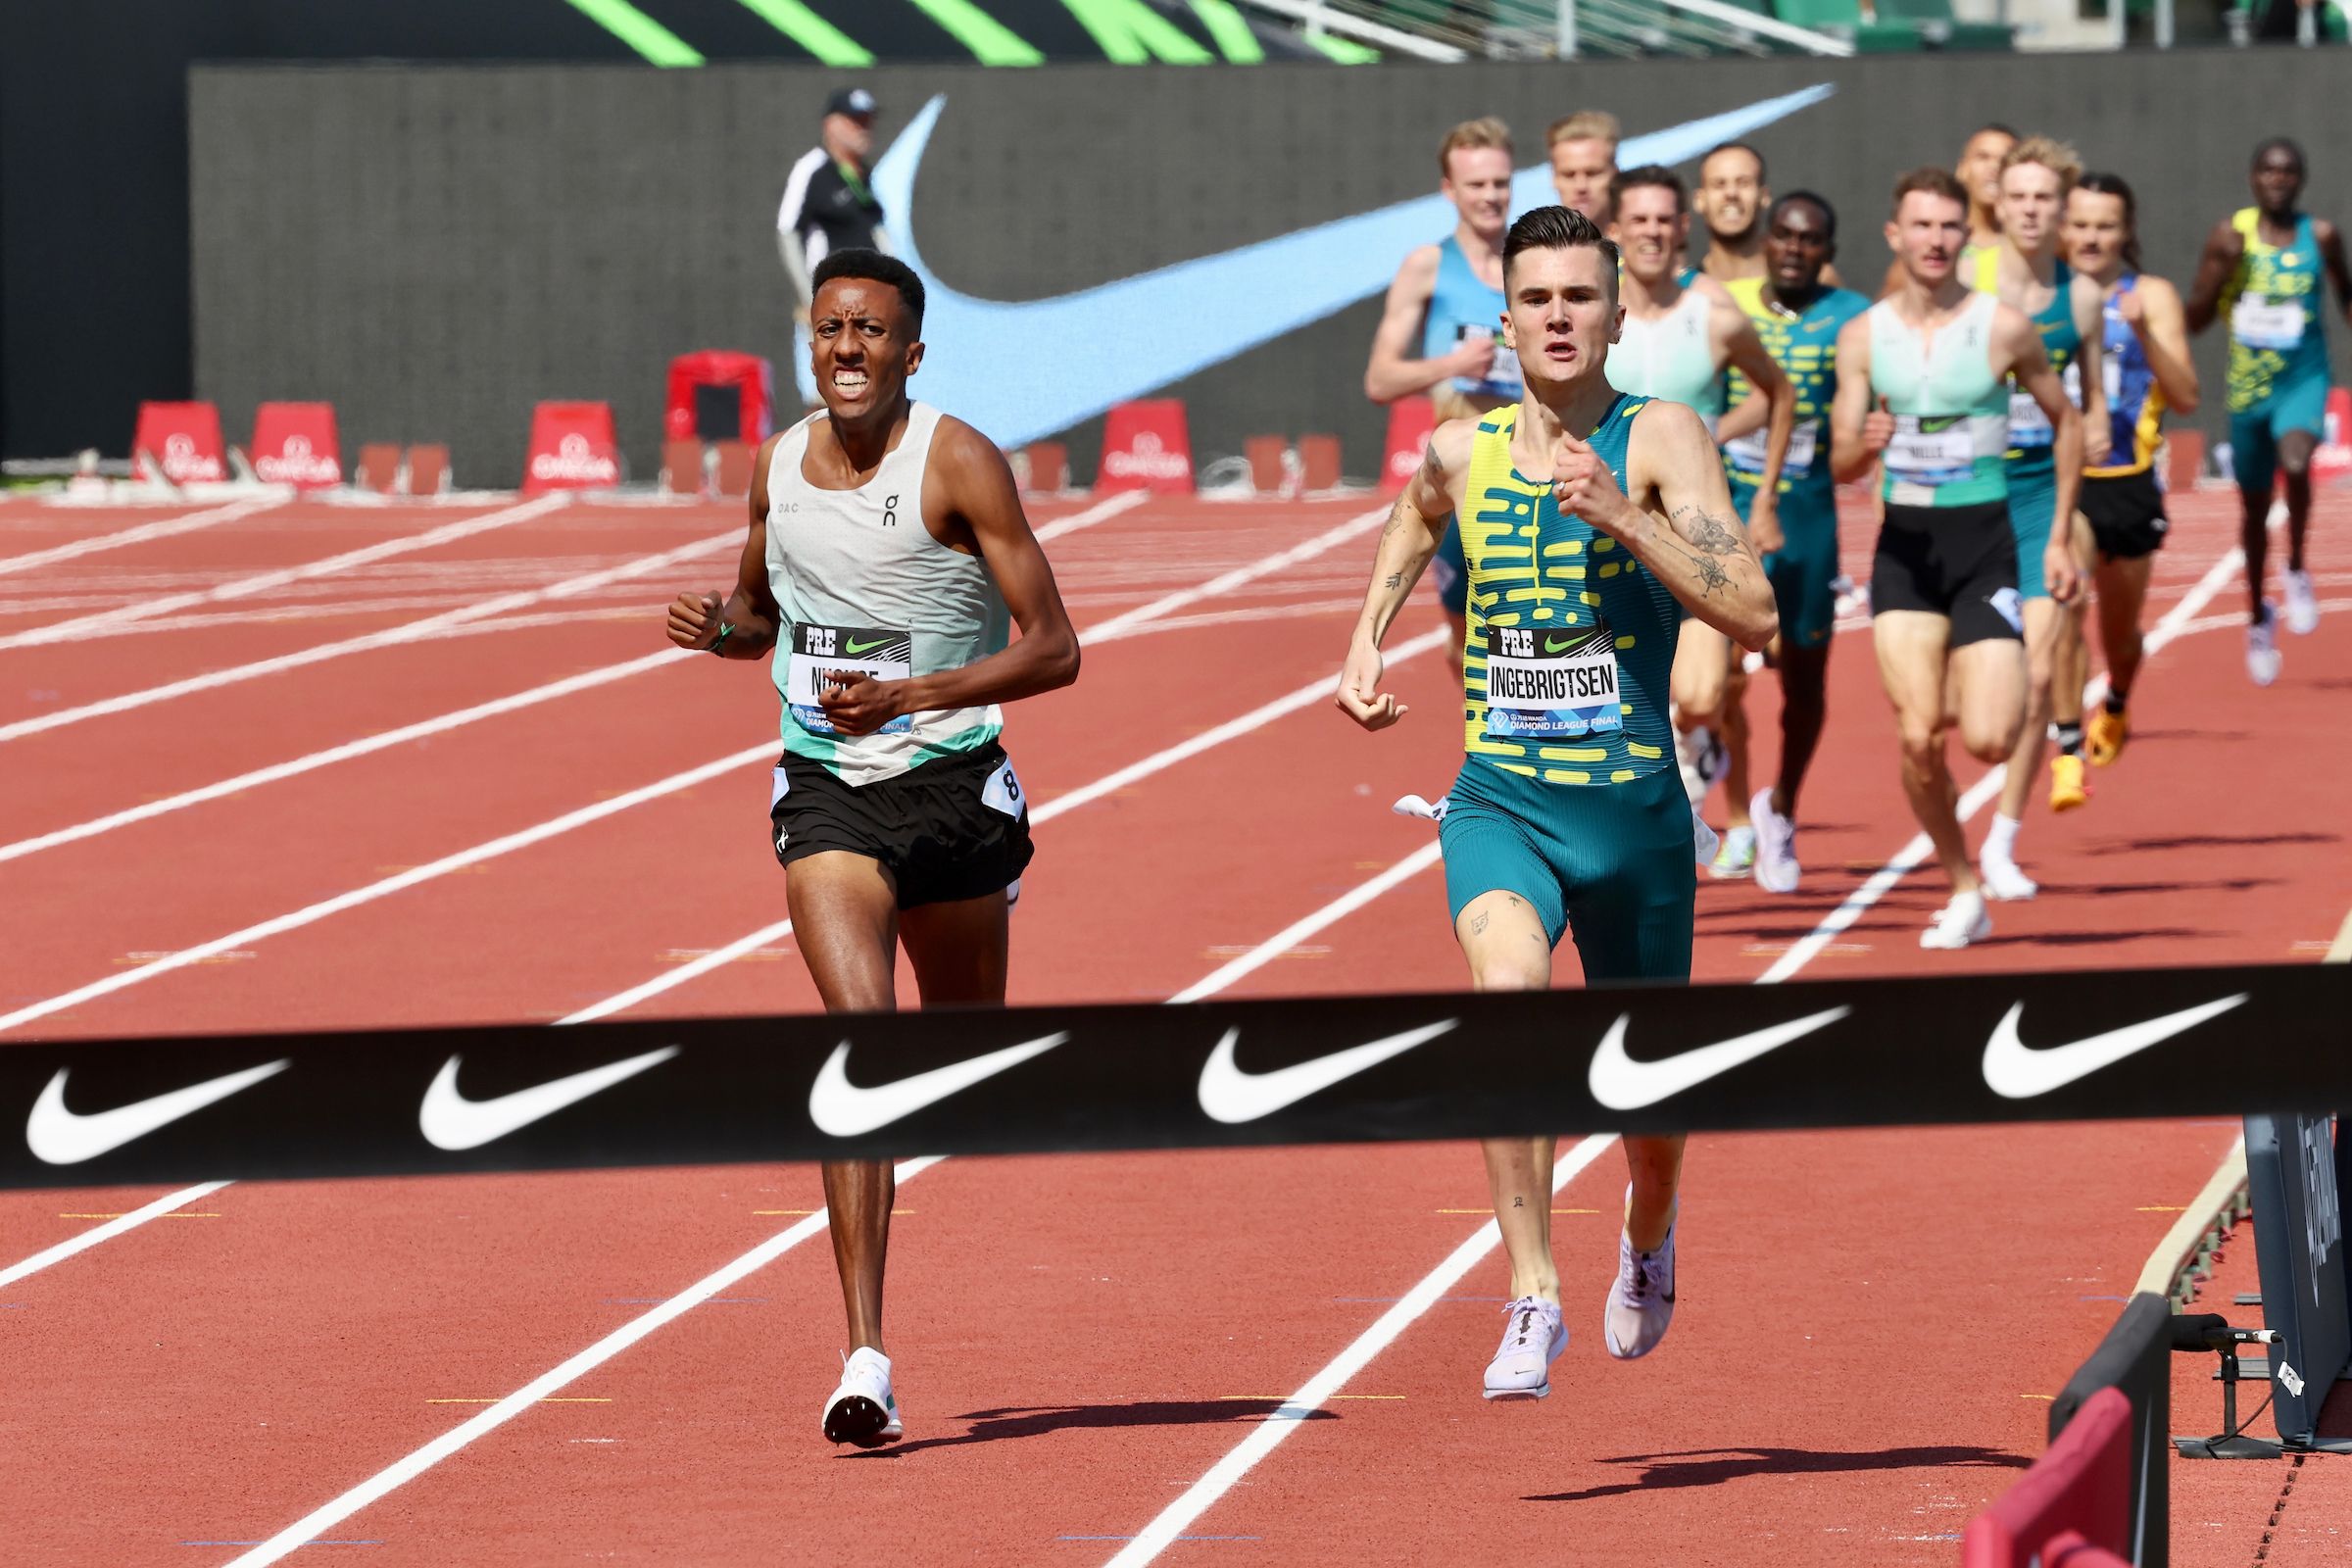 Athing Mu wins Prefontaine Classic 800 with new American record